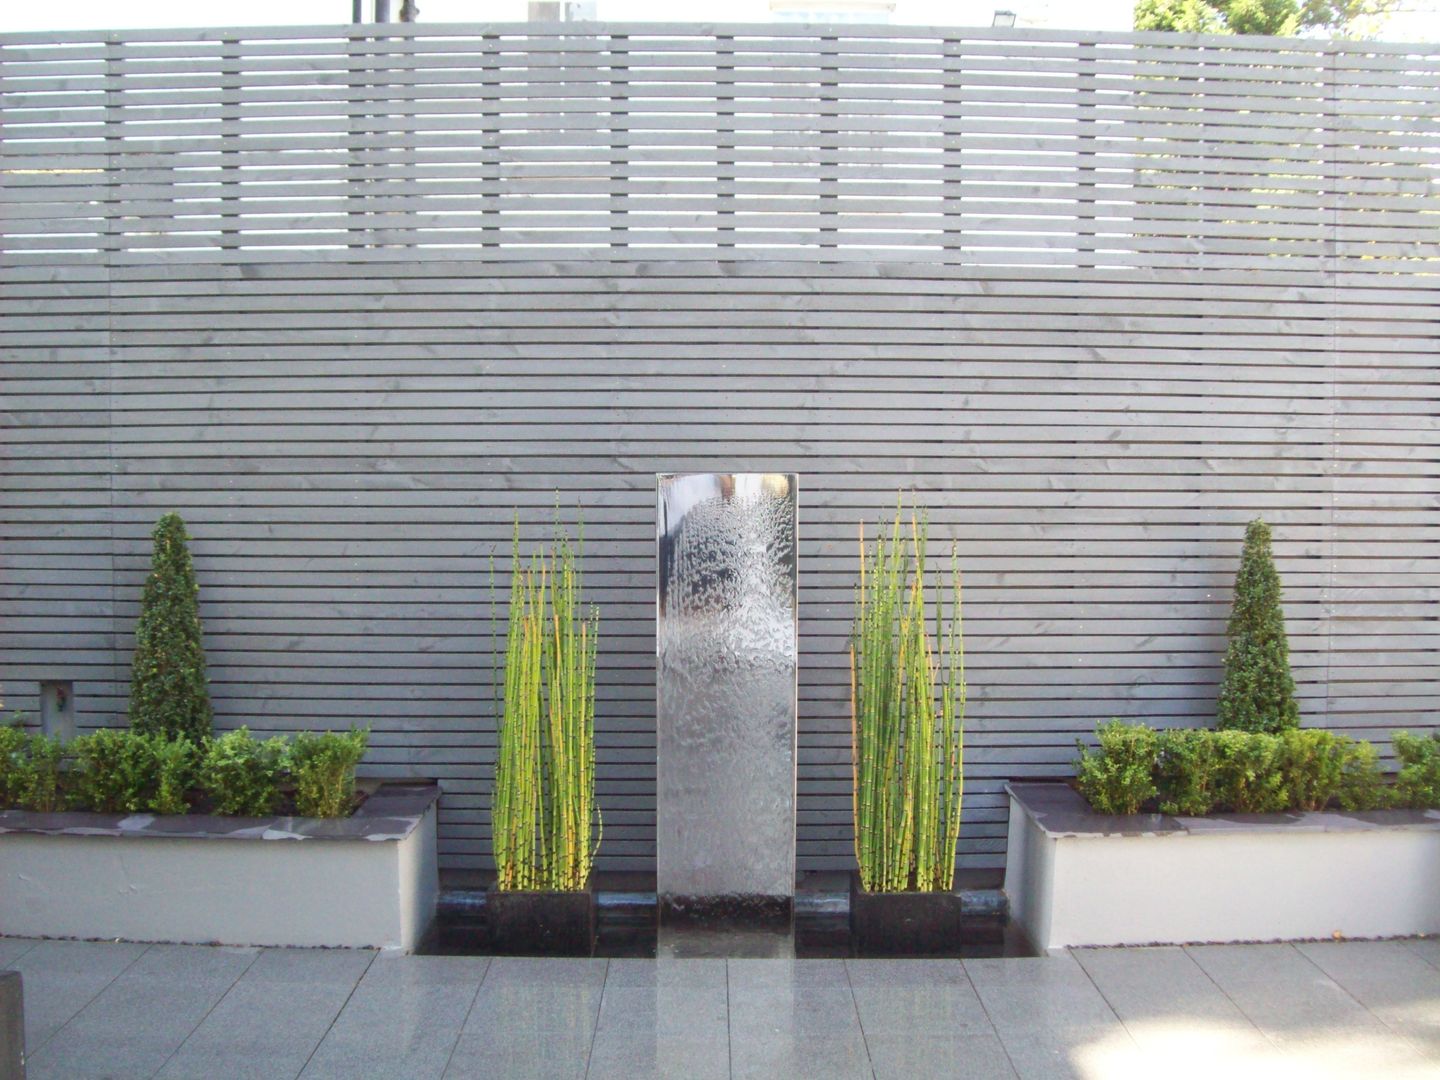 Stainless Steel Metal Water Feature Unique Landscapes Modern garden